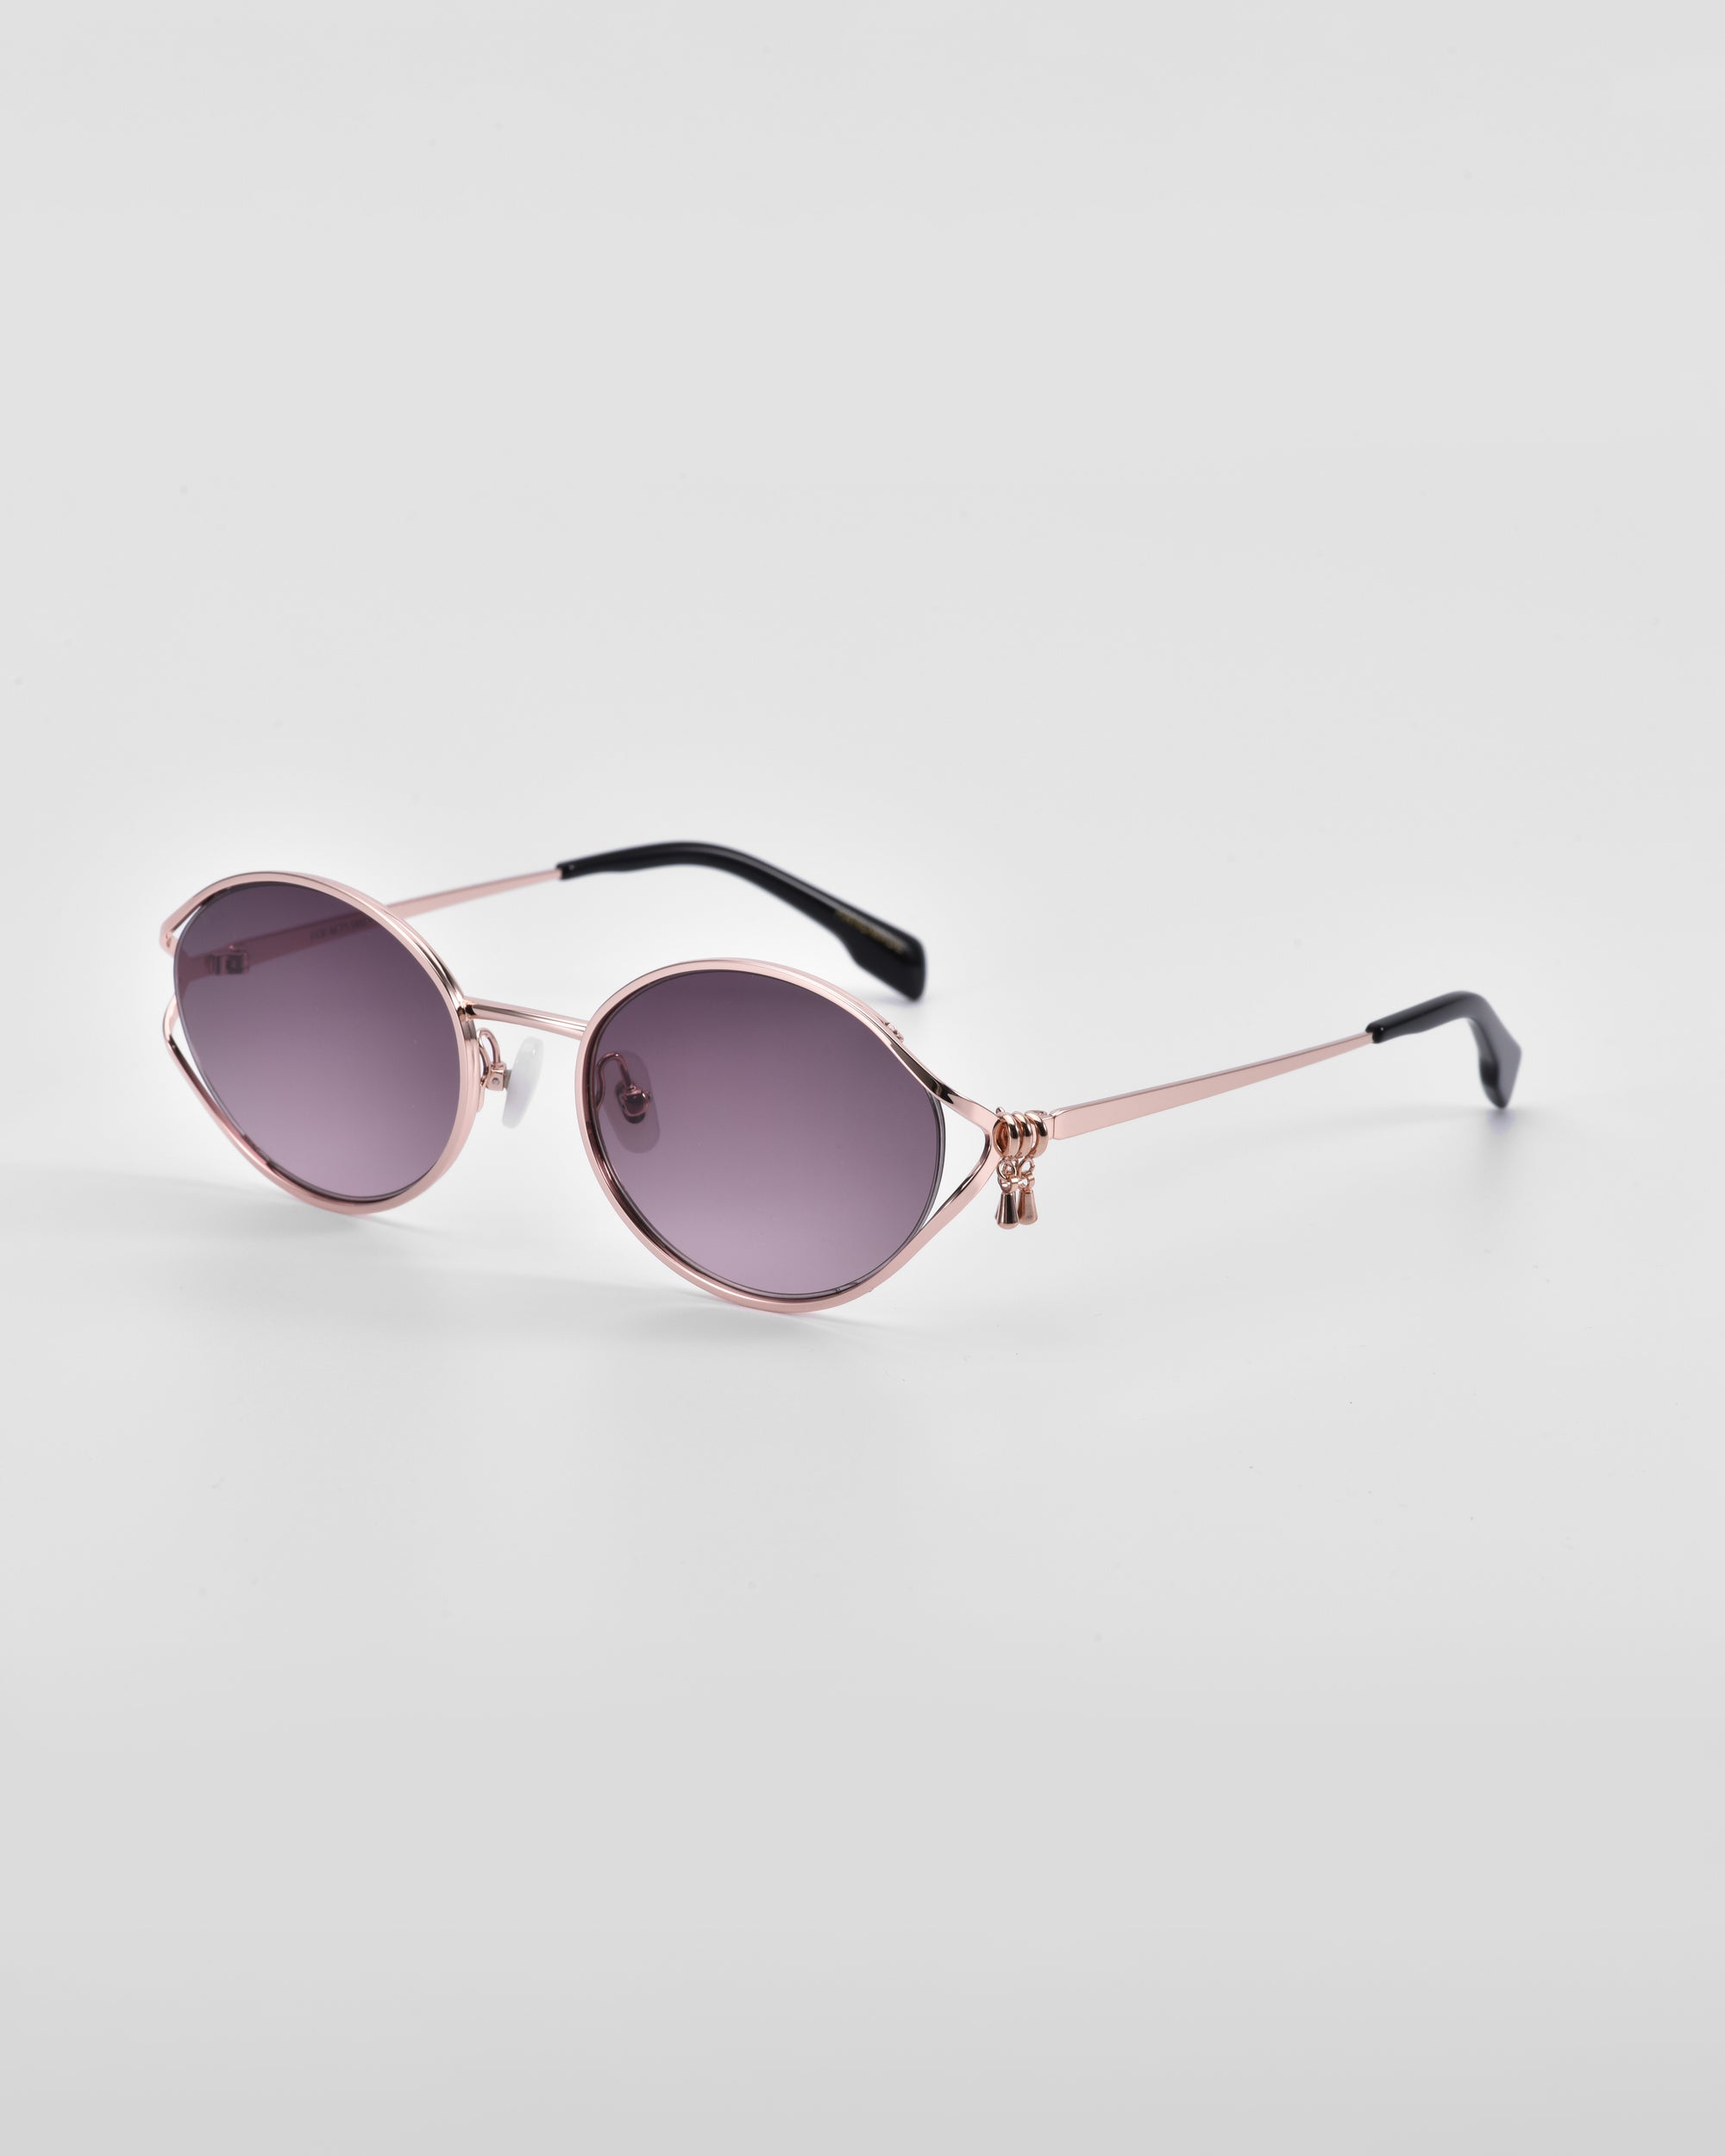 A pair of stylish Sky sunglasses from For Art&#39;s Sake® with rose gold frames and dark, tinted lenses. The sunglasses feature 18-karat gold thin arms with black tips and natural jade-stone nose pads. The overall design is elegant and modern against a plain white background.